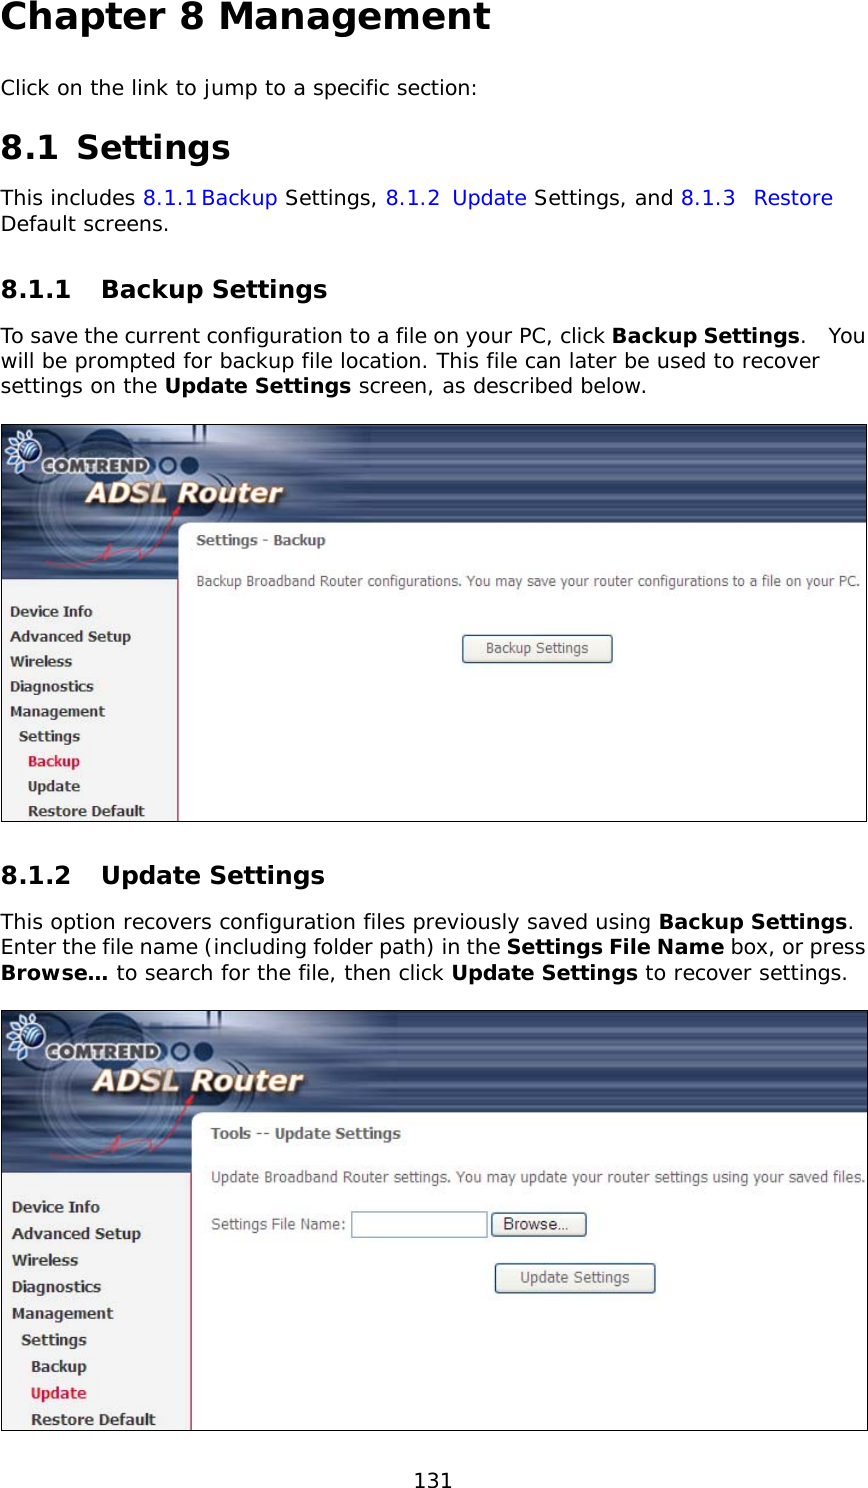  131 Chapter 8 Management Click on the link to jump to a specific section:  8.1 Settings This includes 8.1.1 Backup Settings, 8.1.2 Update Settings, and 8.1.3 Restore Default screens. 8.1.1 Backup Settings  To save the current configuration to a file on your PC, click Backup Settings.  You will be prompted for backup file location. This file can later be used to recover settings on the Update Settings screen, as described below.    8.1.2 Update Settings This option recovers configuration files previously saved using Backup Settings.  Enter the file name (including folder path) in the Settings File Name box, or press Browse… to search for the file, then click Update Settings to recover settings.   